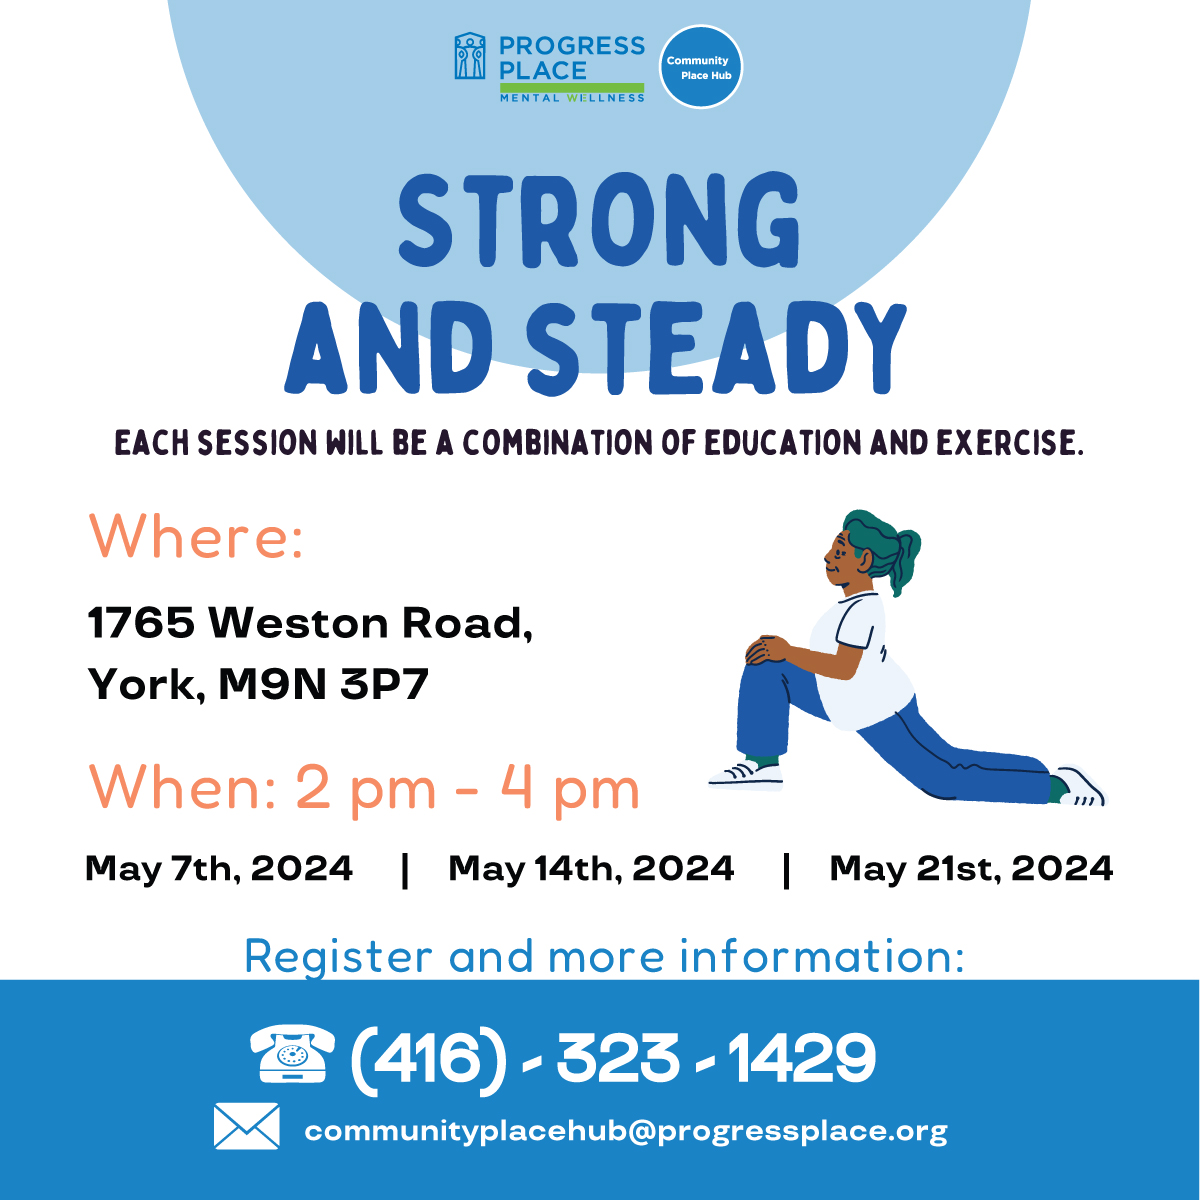 REMINDER:🧍#Strong and #Steady Learn how to prevent falls and practice easy exercises that promote balance, strength, and endurance in this FREE 3-week program 🗓️First session: Tuesday, May 10, 2024 ⏰2:00 pm - 4:00 pm 📍1765 Weston Road, York, M9N 3P7 Contact: 416-323-1429